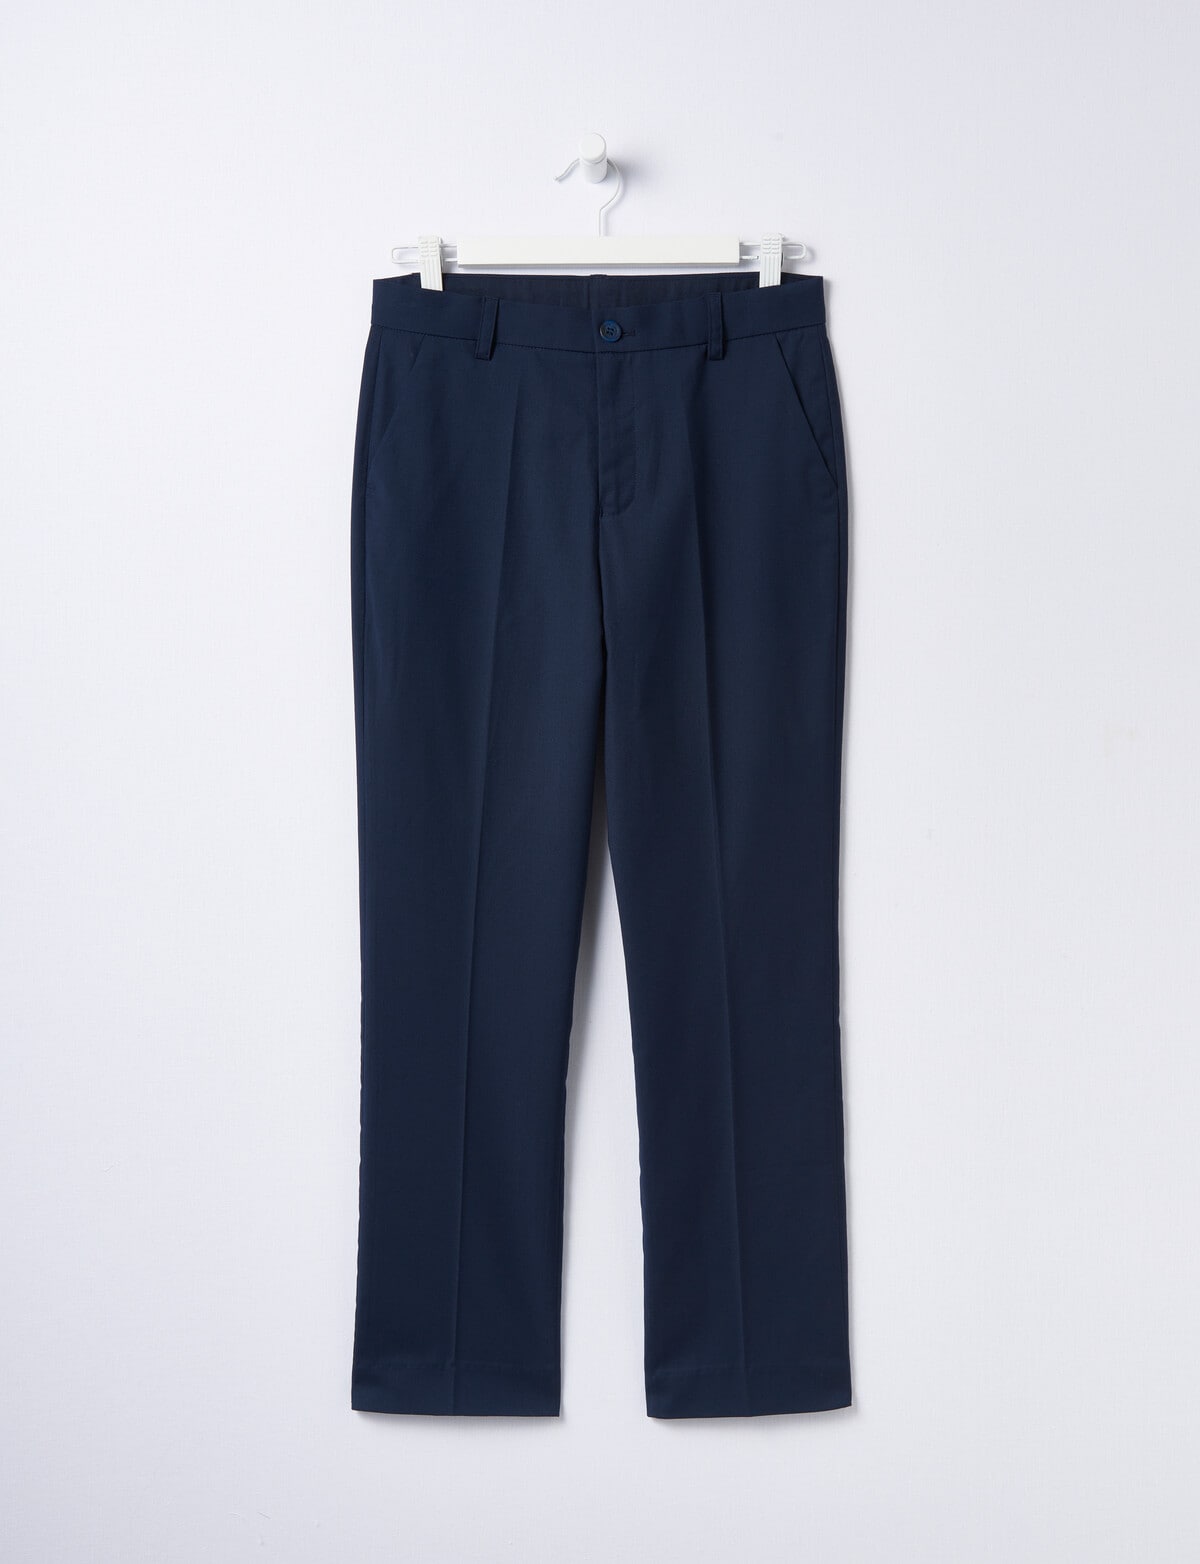 Boys Black Stretch Trousers | Buy Online at Moss